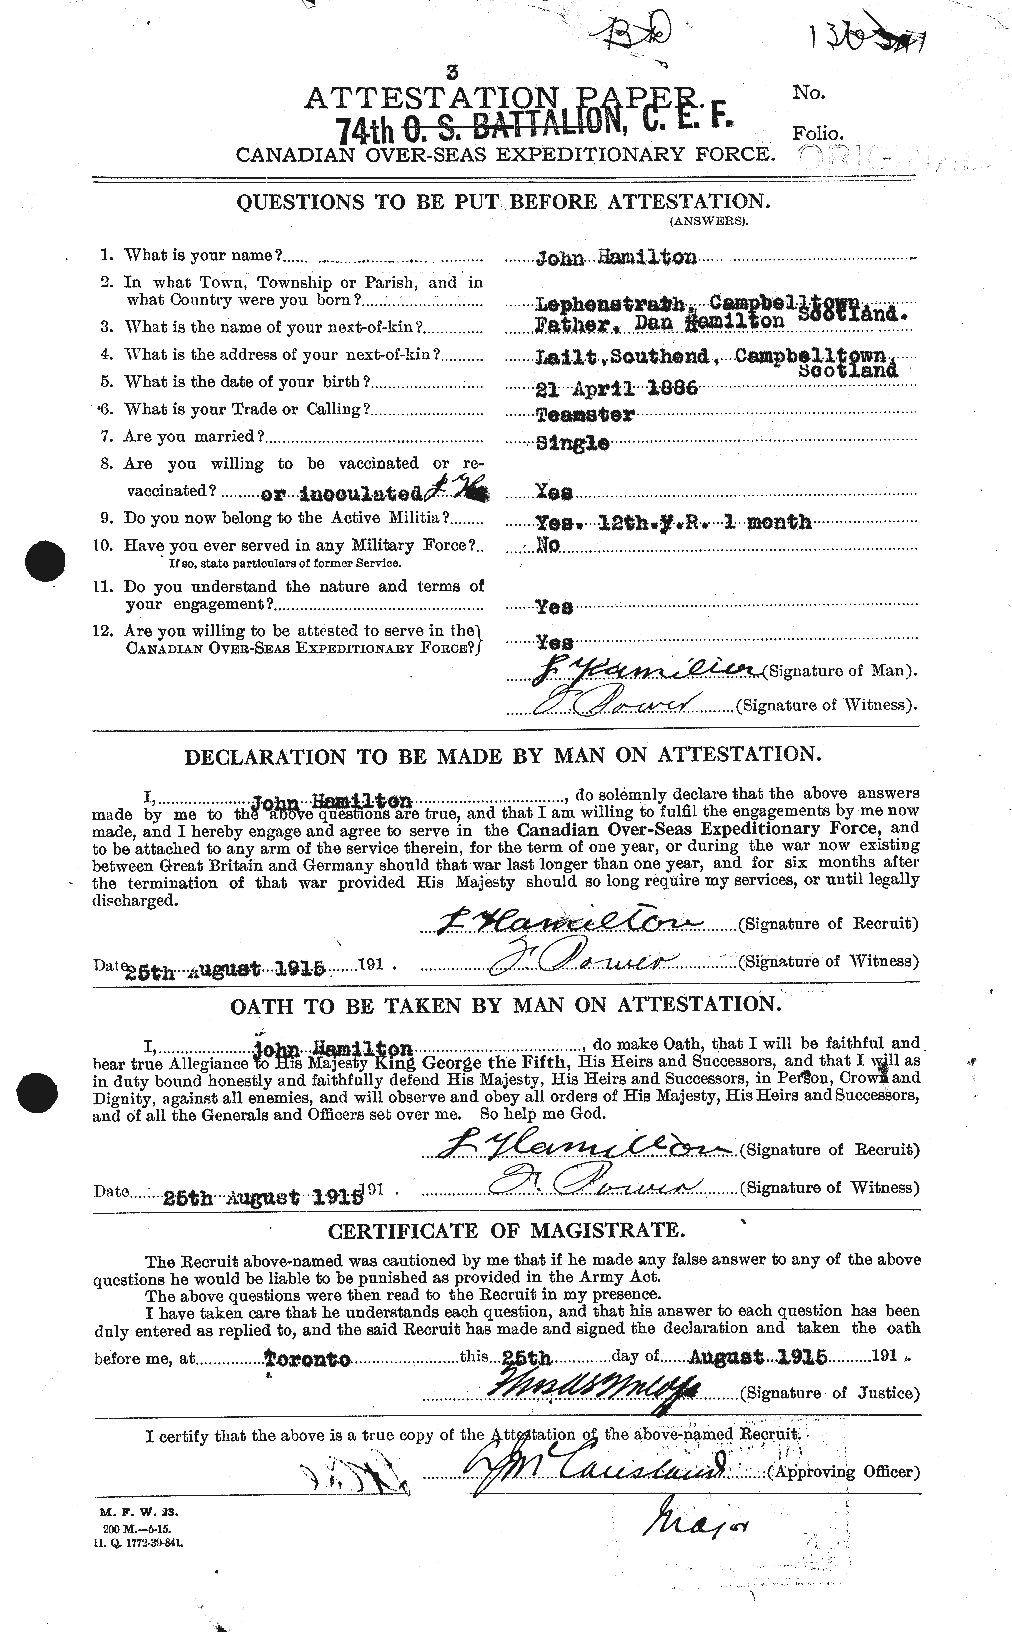 Personnel Records of the First World War - CEF 373033a